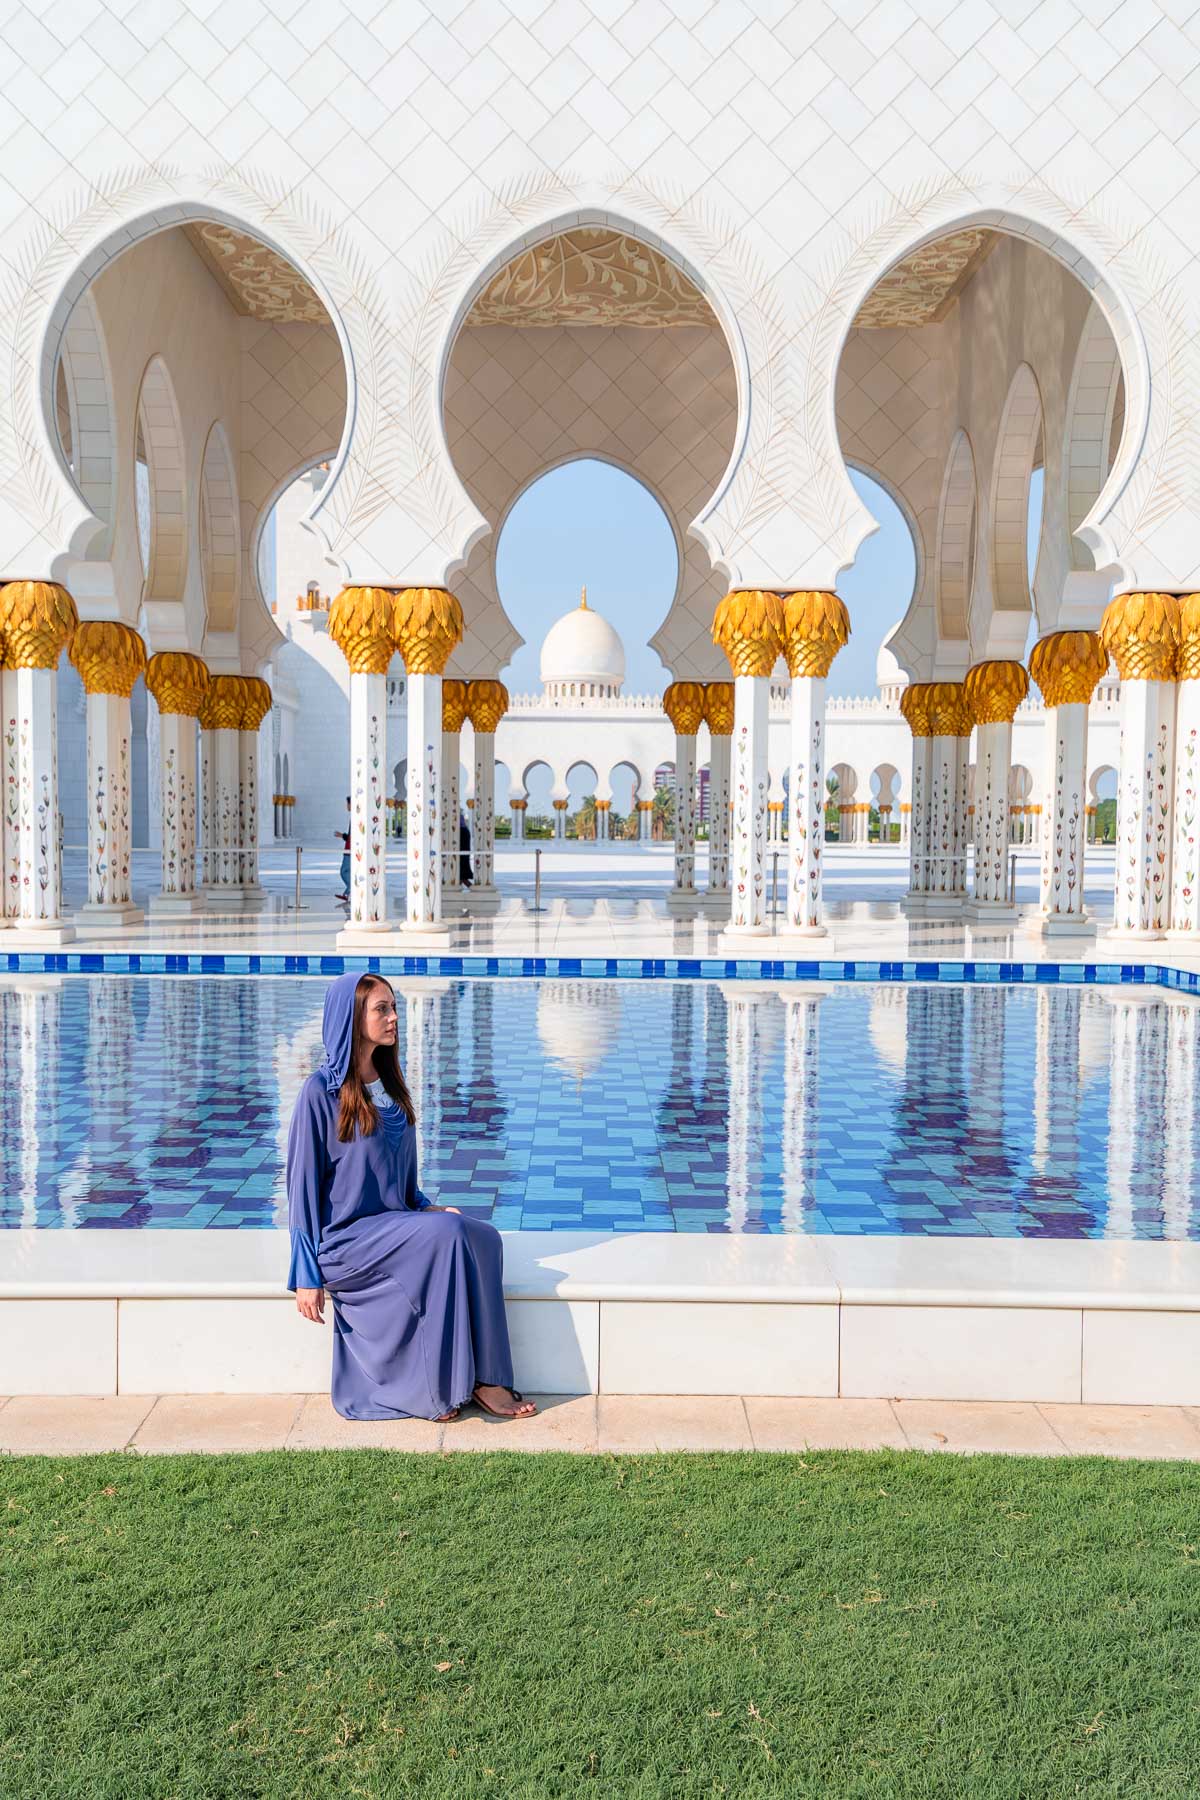 Girl in a blue abaya sitting by the pool at Sheikh Zayed Grand Mosque, Abu Dhabi